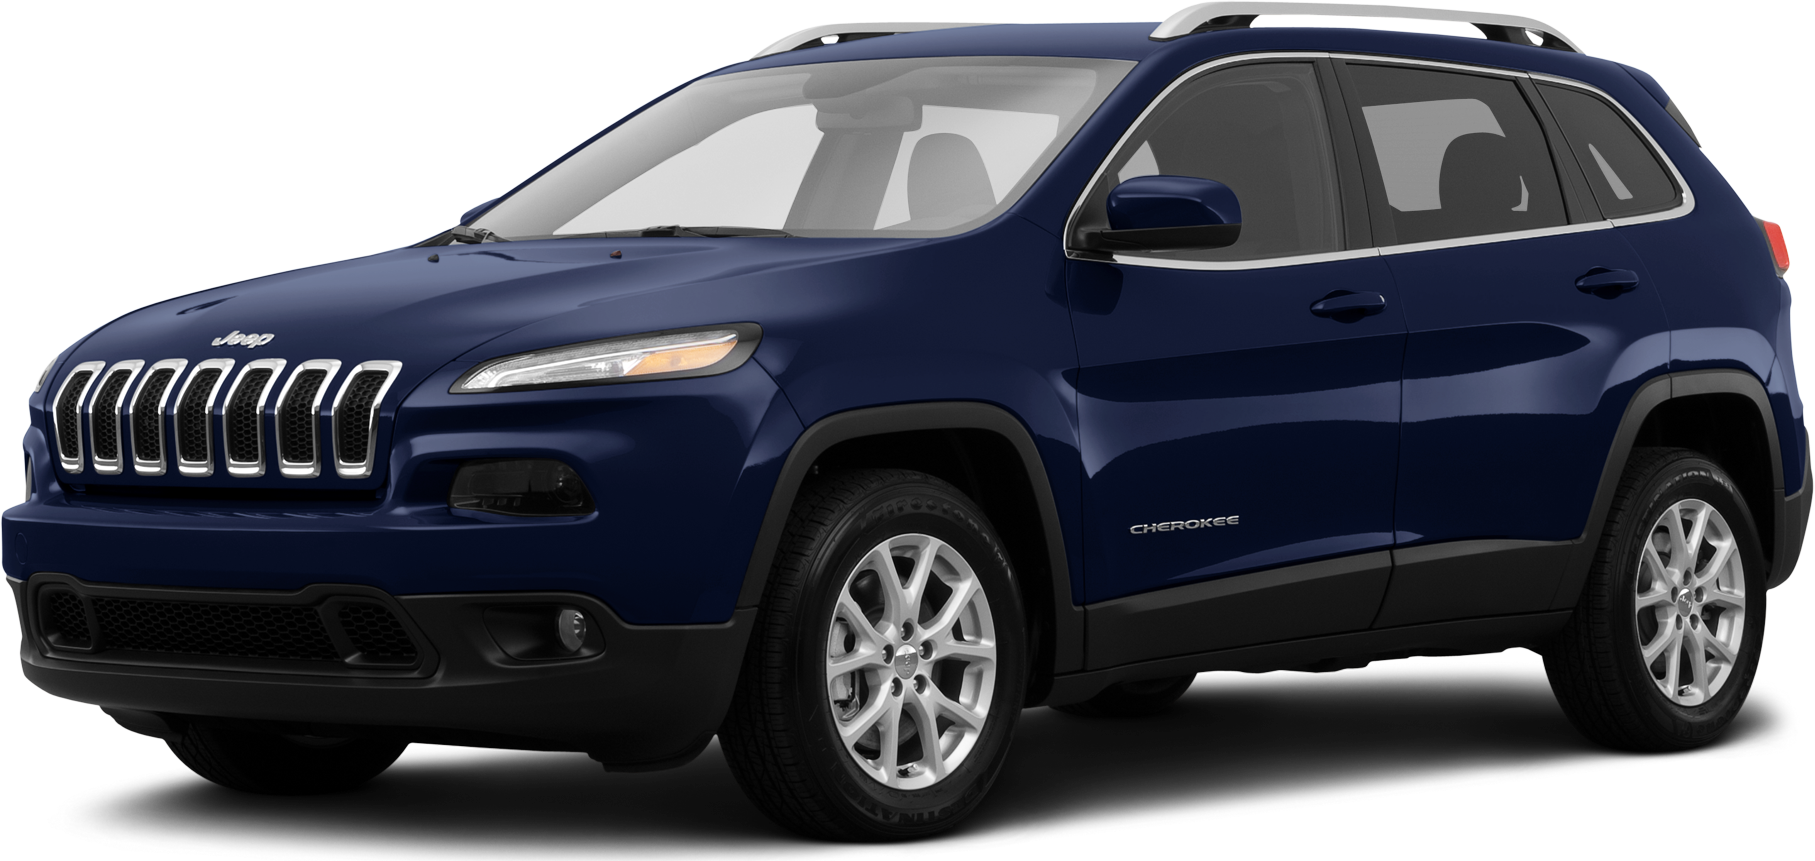 2014 Jeep Cherokee Values & Cars for Sale Kelley Blue Book